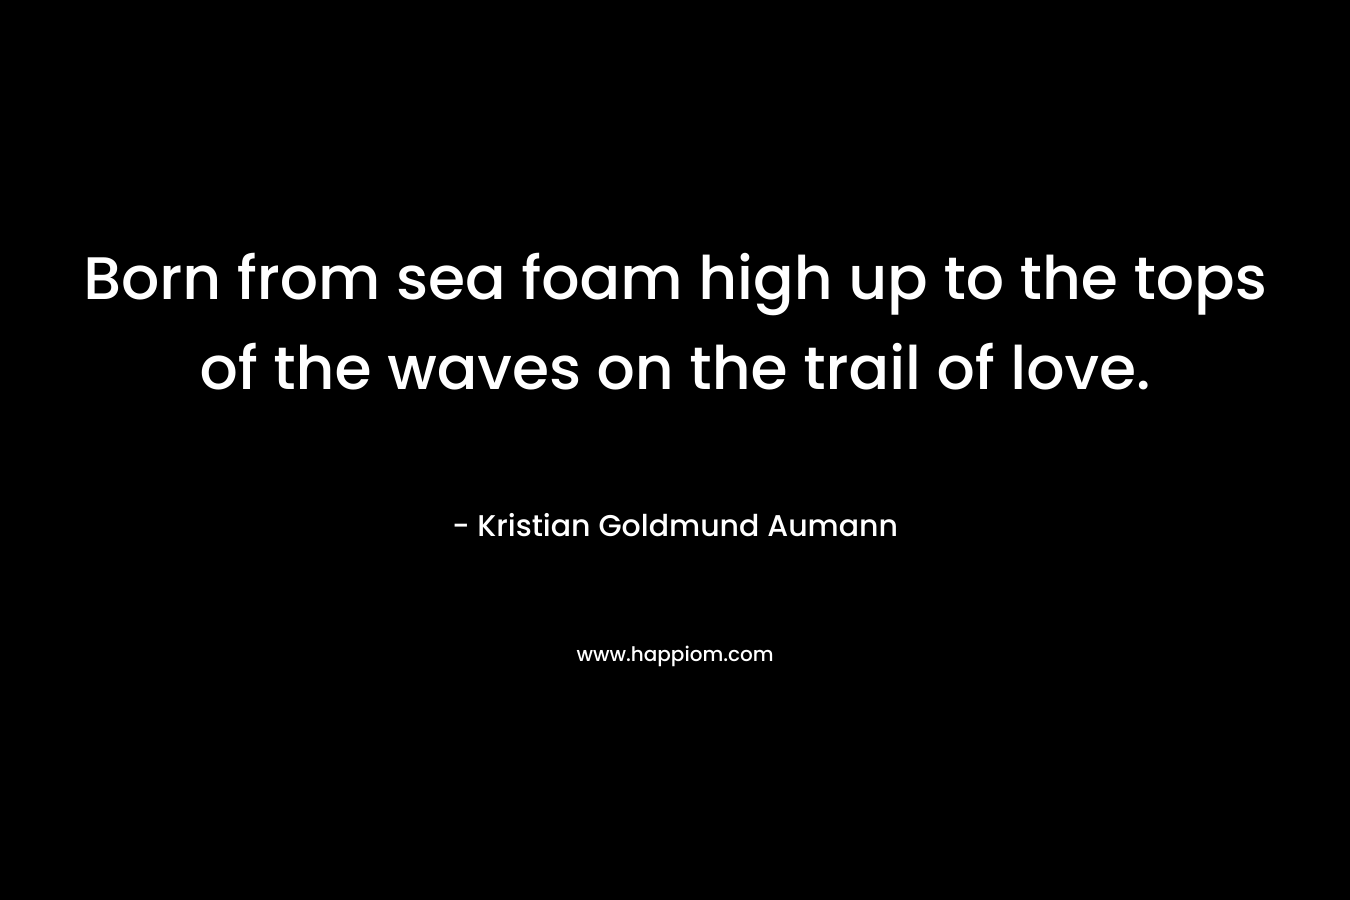 Born from sea foam high up to the tops of the waves on the trail of love. – Kristian Goldmund Aumann